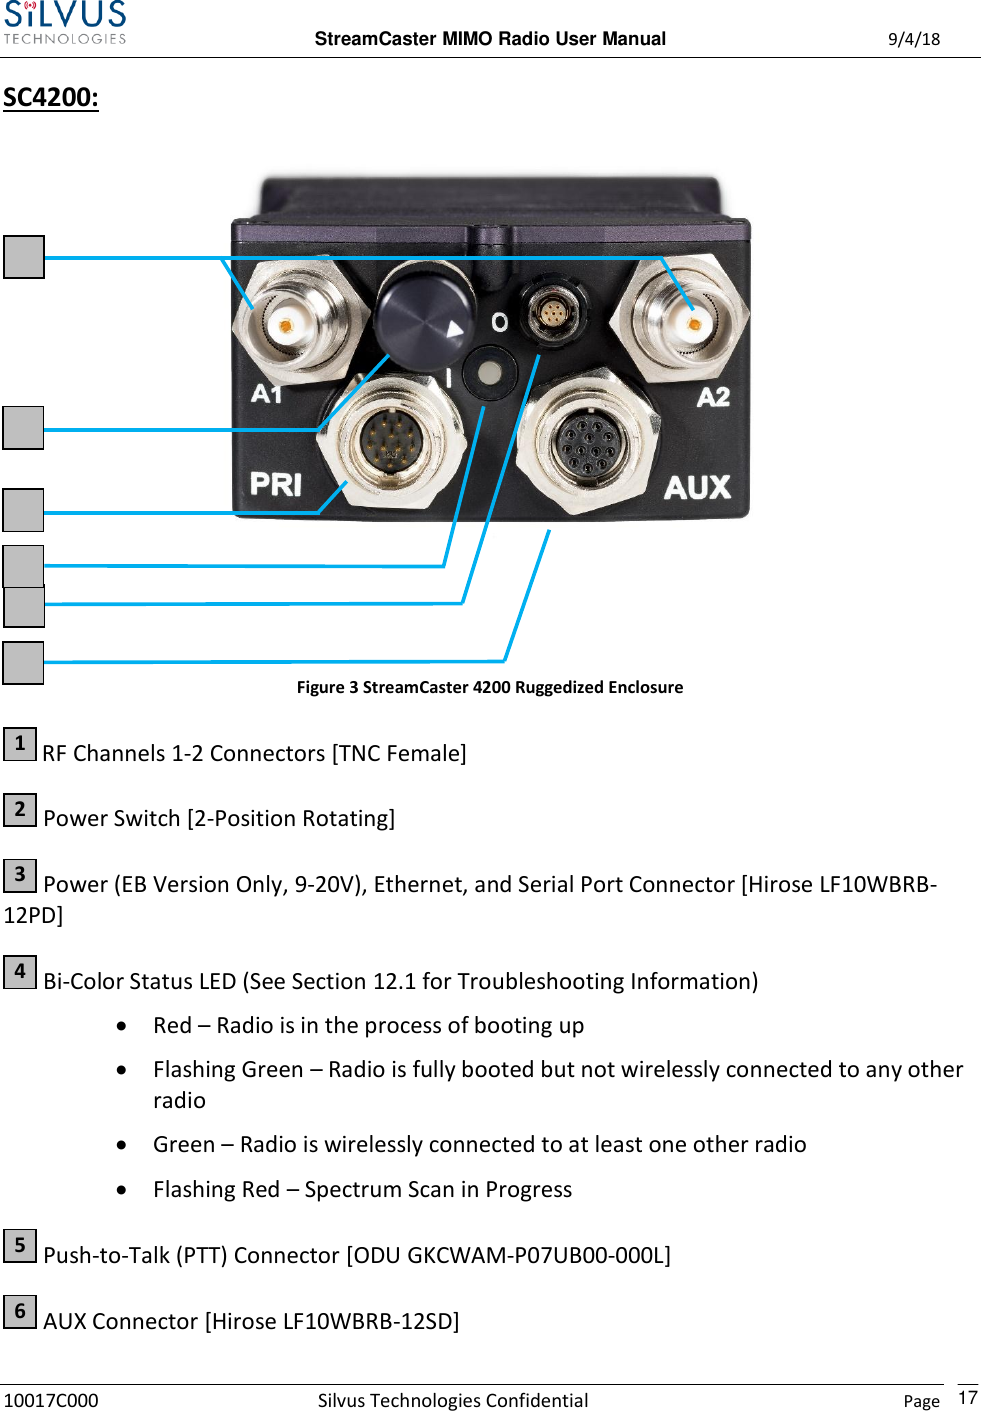  StreamCaster MIMO Radio User Manual  9/4/18 10017C000 Silvus Technologies Confidential    Page    17 SC4200:     Figure 3 StreamCaster 4200 Ruggedized Enclosure  RF Channels 1-2 Connectors [TNC Female]  Power Switch [2-Position Rotating]  Power (EB Version Only, 9-20V), Ethernet, and Serial Port Connector [Hirose LF10WBRB-12PD]  Bi-Color Status LED (See Section 12.1 for Troubleshooting Information)  Red – Radio is in the process of booting up  Flashing Green – Radio is fully booted but not wirelessly connected to any other radio  Green – Radio is wirelessly connected to at least one other radio  Flashing Red – Spectrum Scan in Progress  Push-to-Talk (PTT) Connector [ODU GKCWAM-P07UB00-000L]  AUX Connector [Hirose LF10WBRB-12SD] 6 5 4 3 2 1 